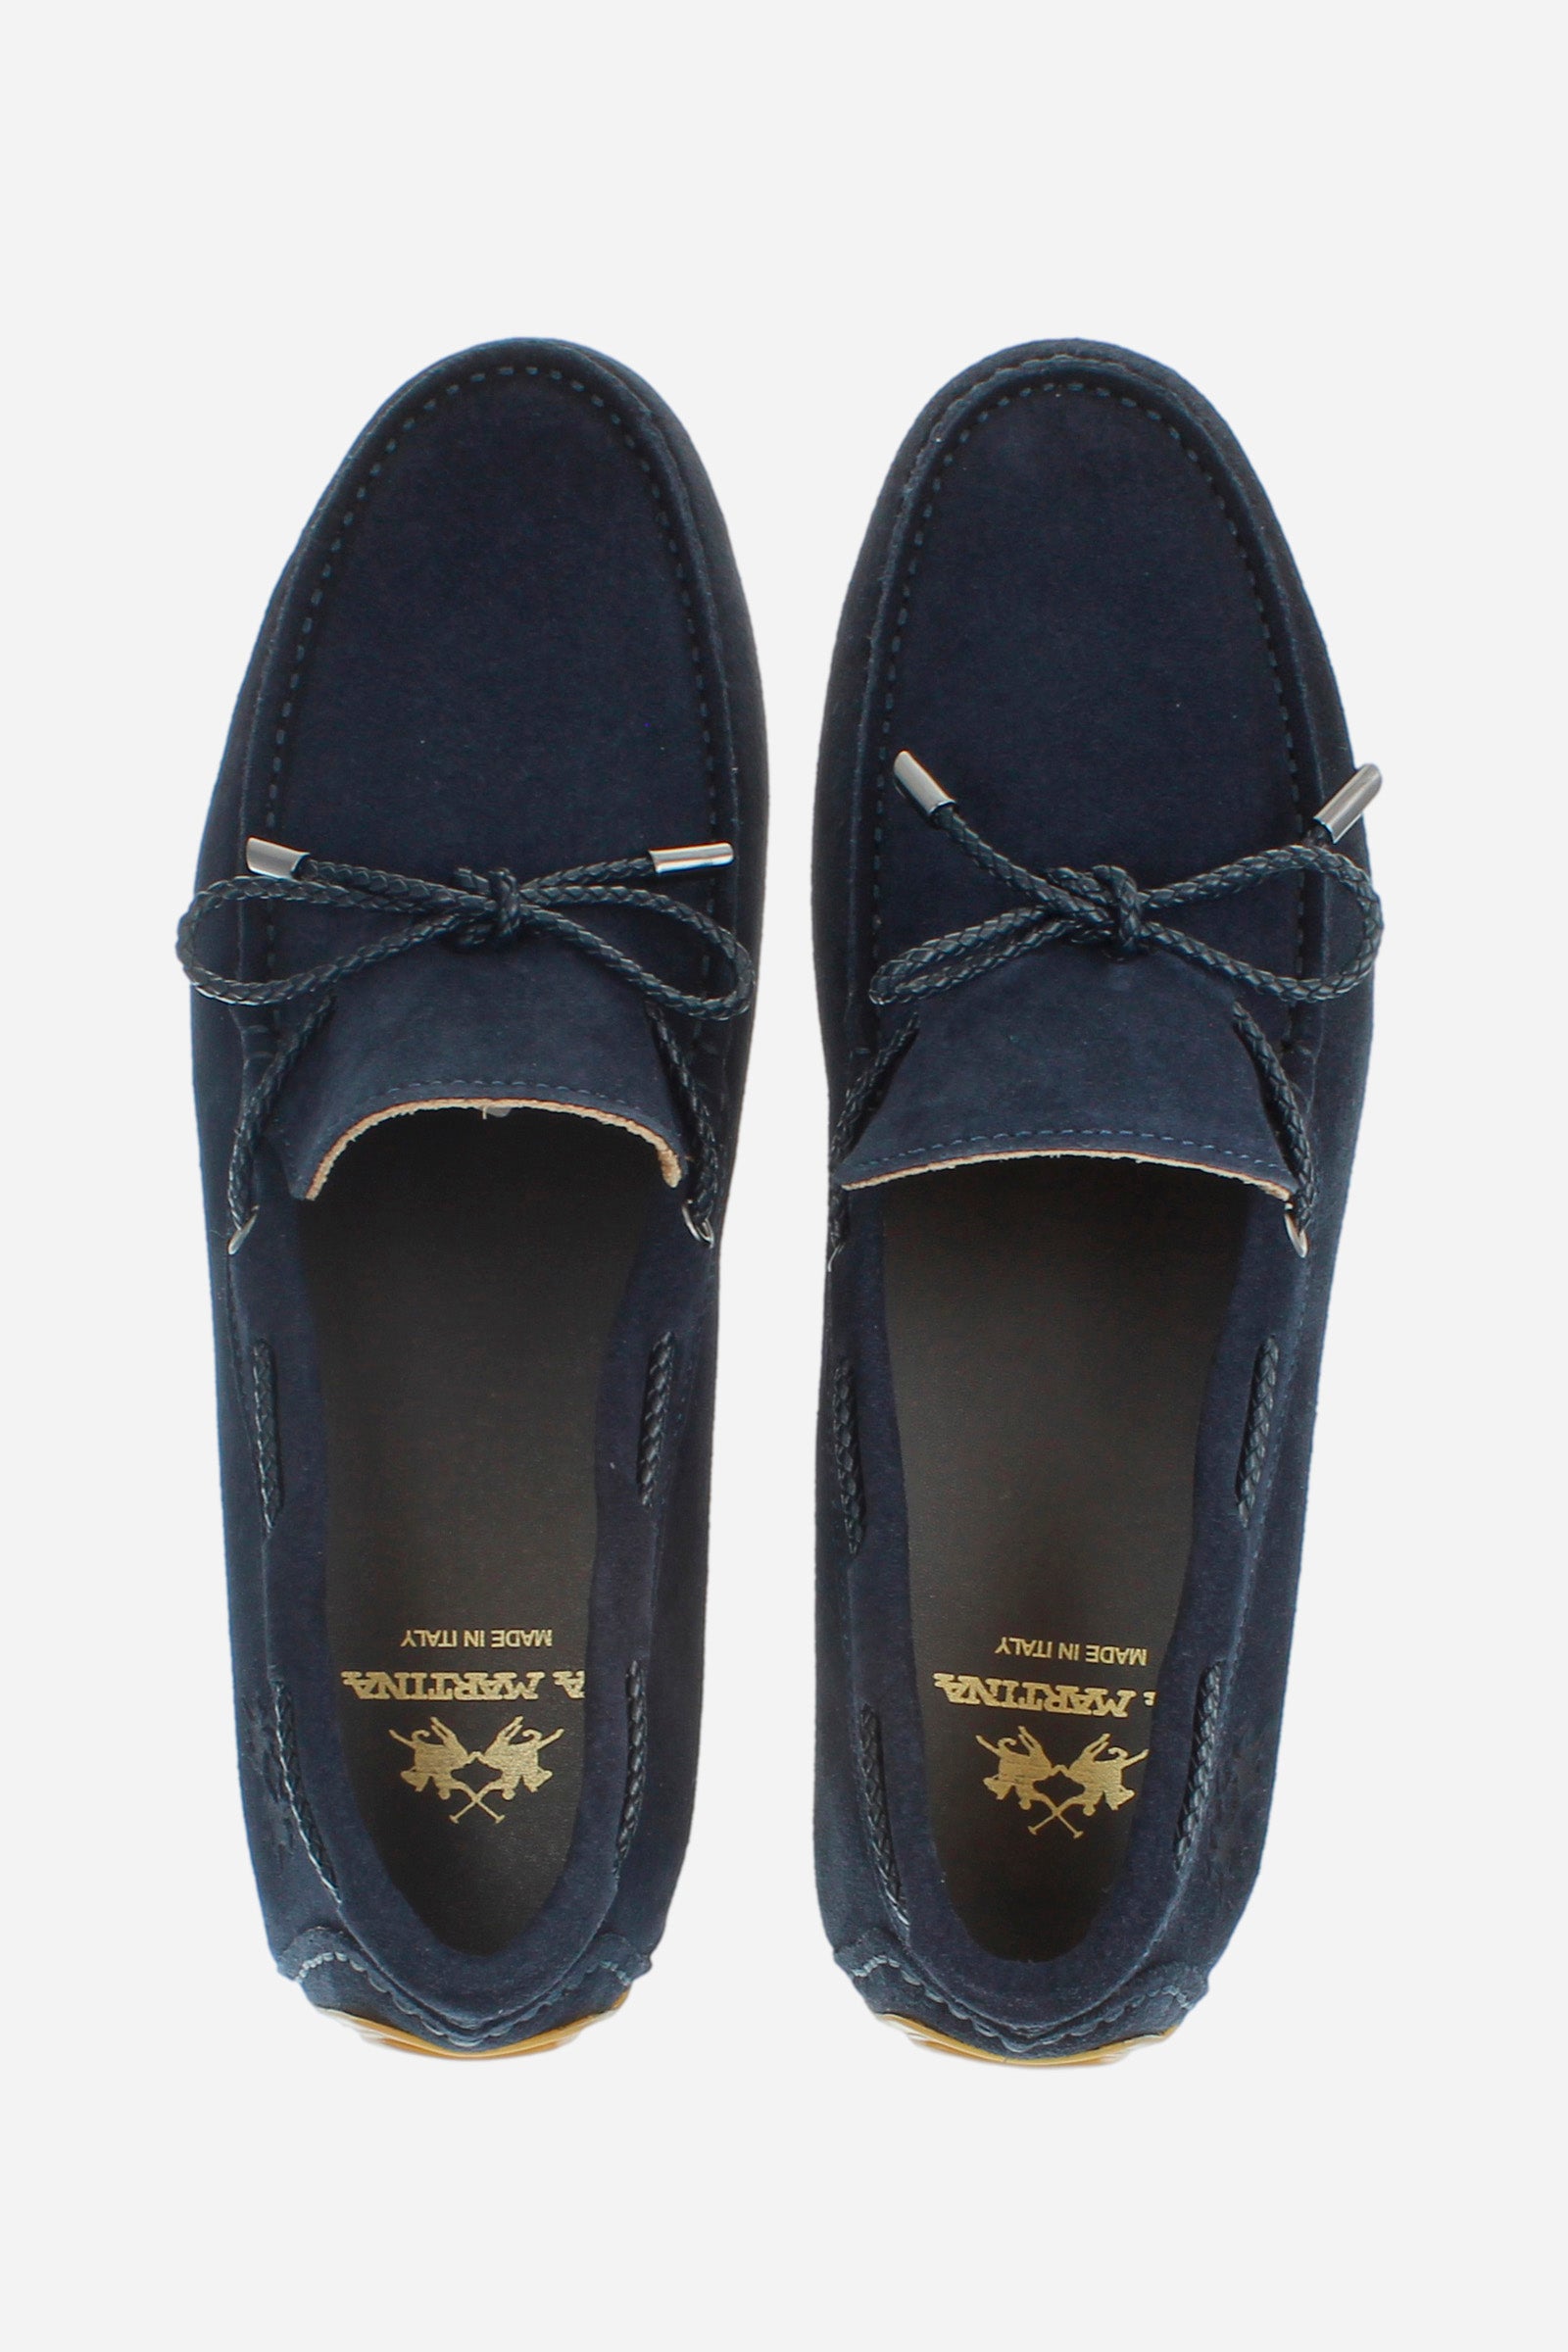 Men's suede loafers with laces